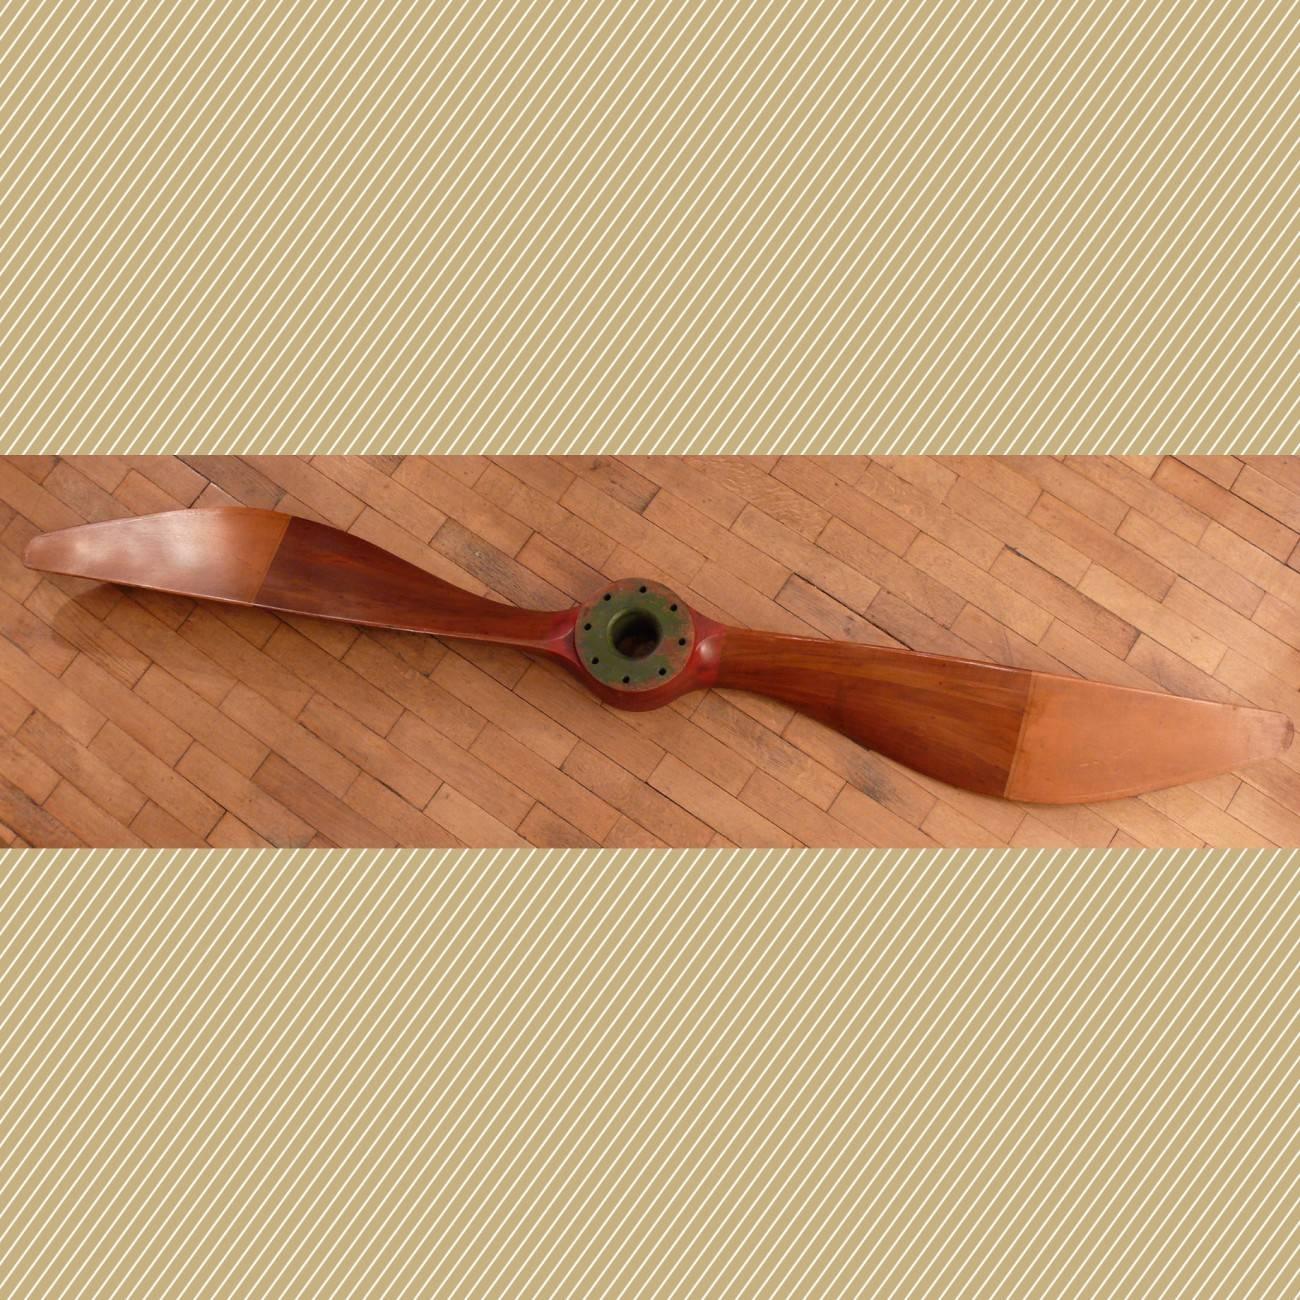 A stunning laminated Walnut propeller from an S.E.5. First World War fighter plane. Details from the makers, 'The Integral Propeller Co. Limited' are intact and the propeller is completely untouched with the ends of the blades covered in doped